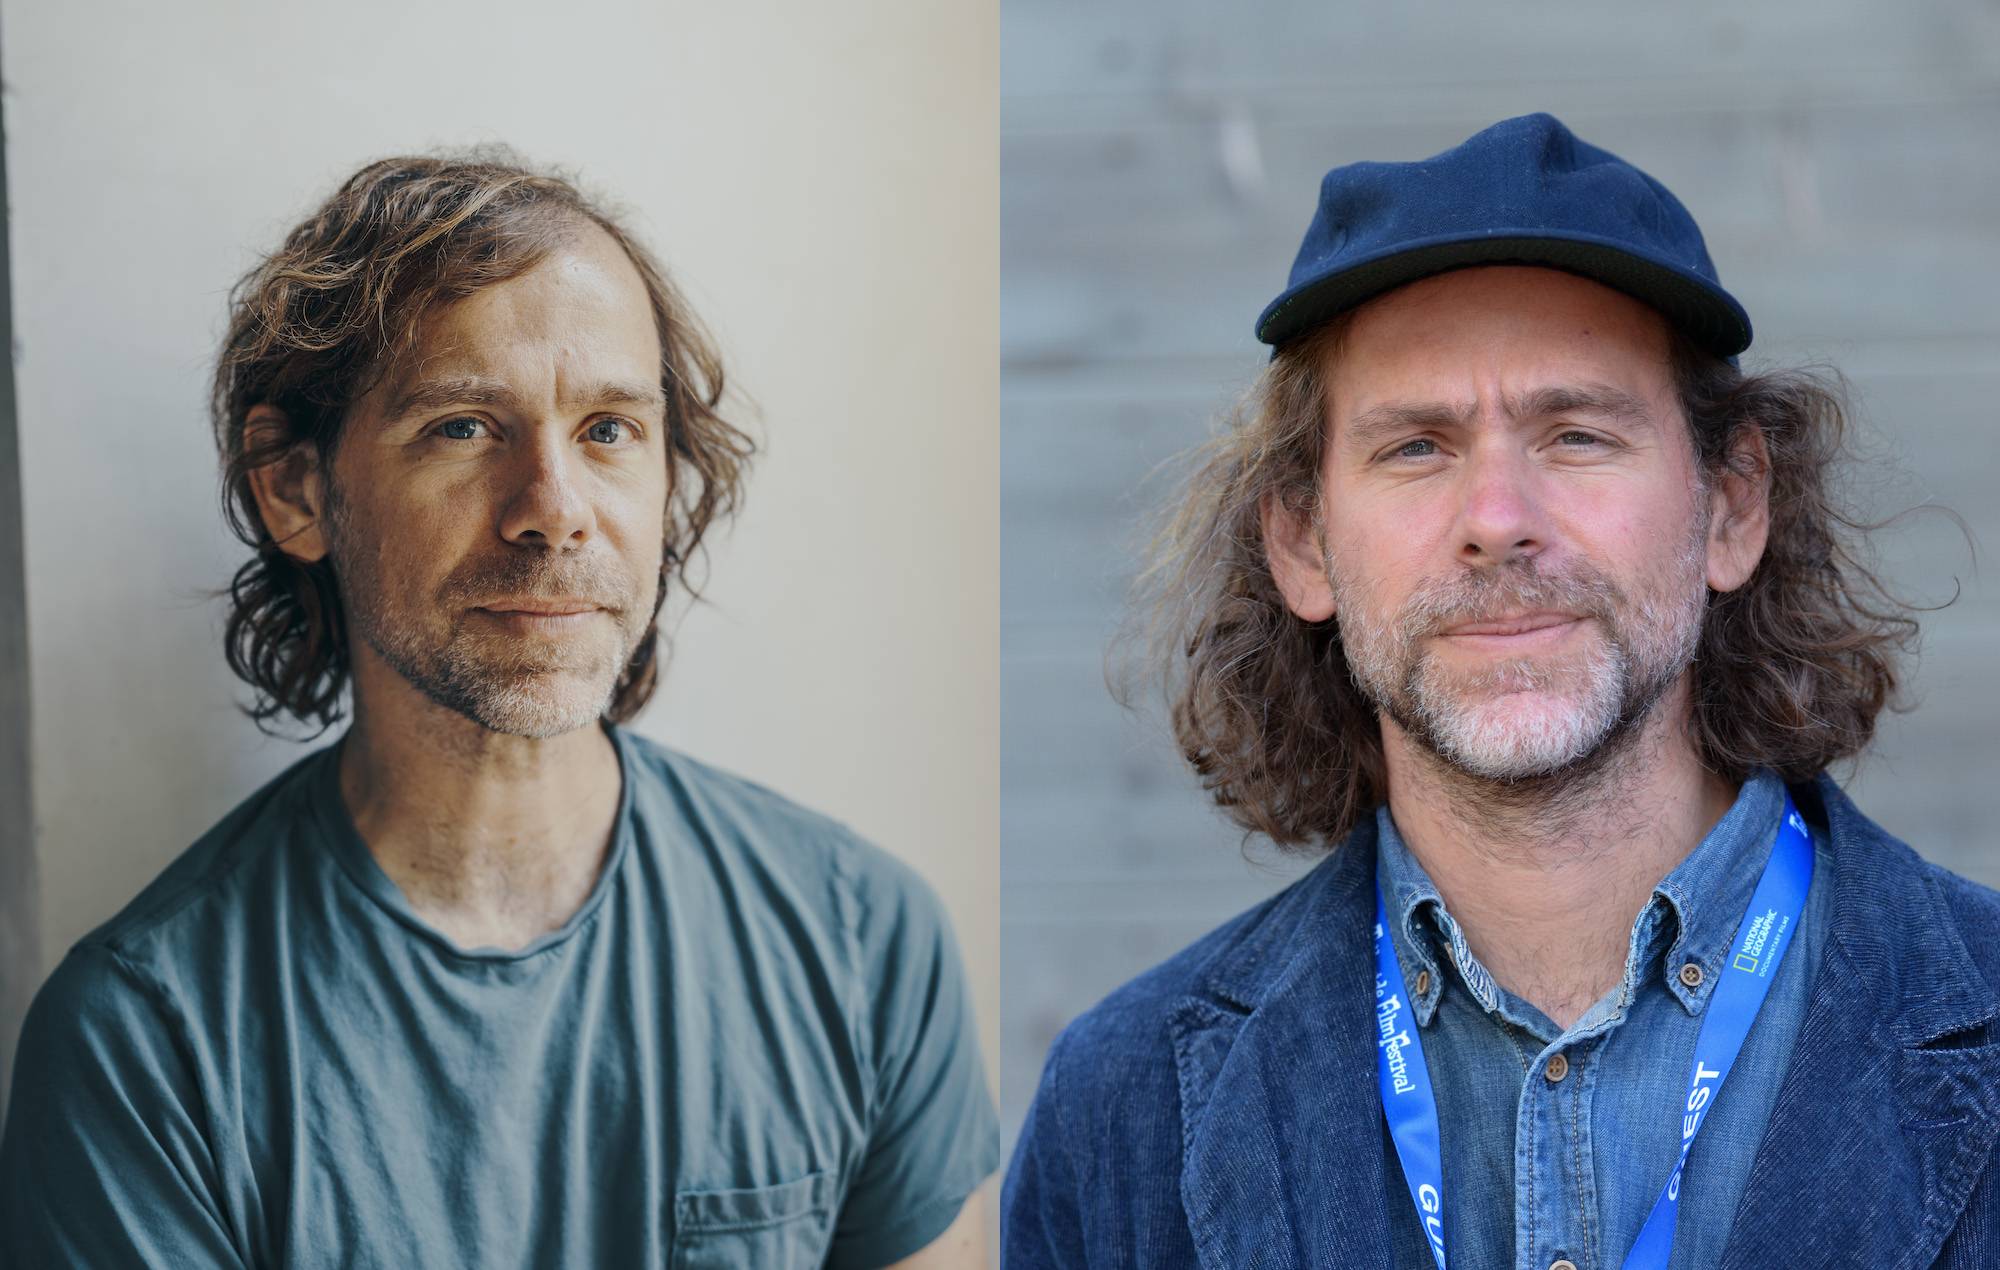 Aaron and Bryce Dessner on their ‘Cyrano’ film soundtrack: “They’re National songs in a way, and have an interior, intimate feeling”